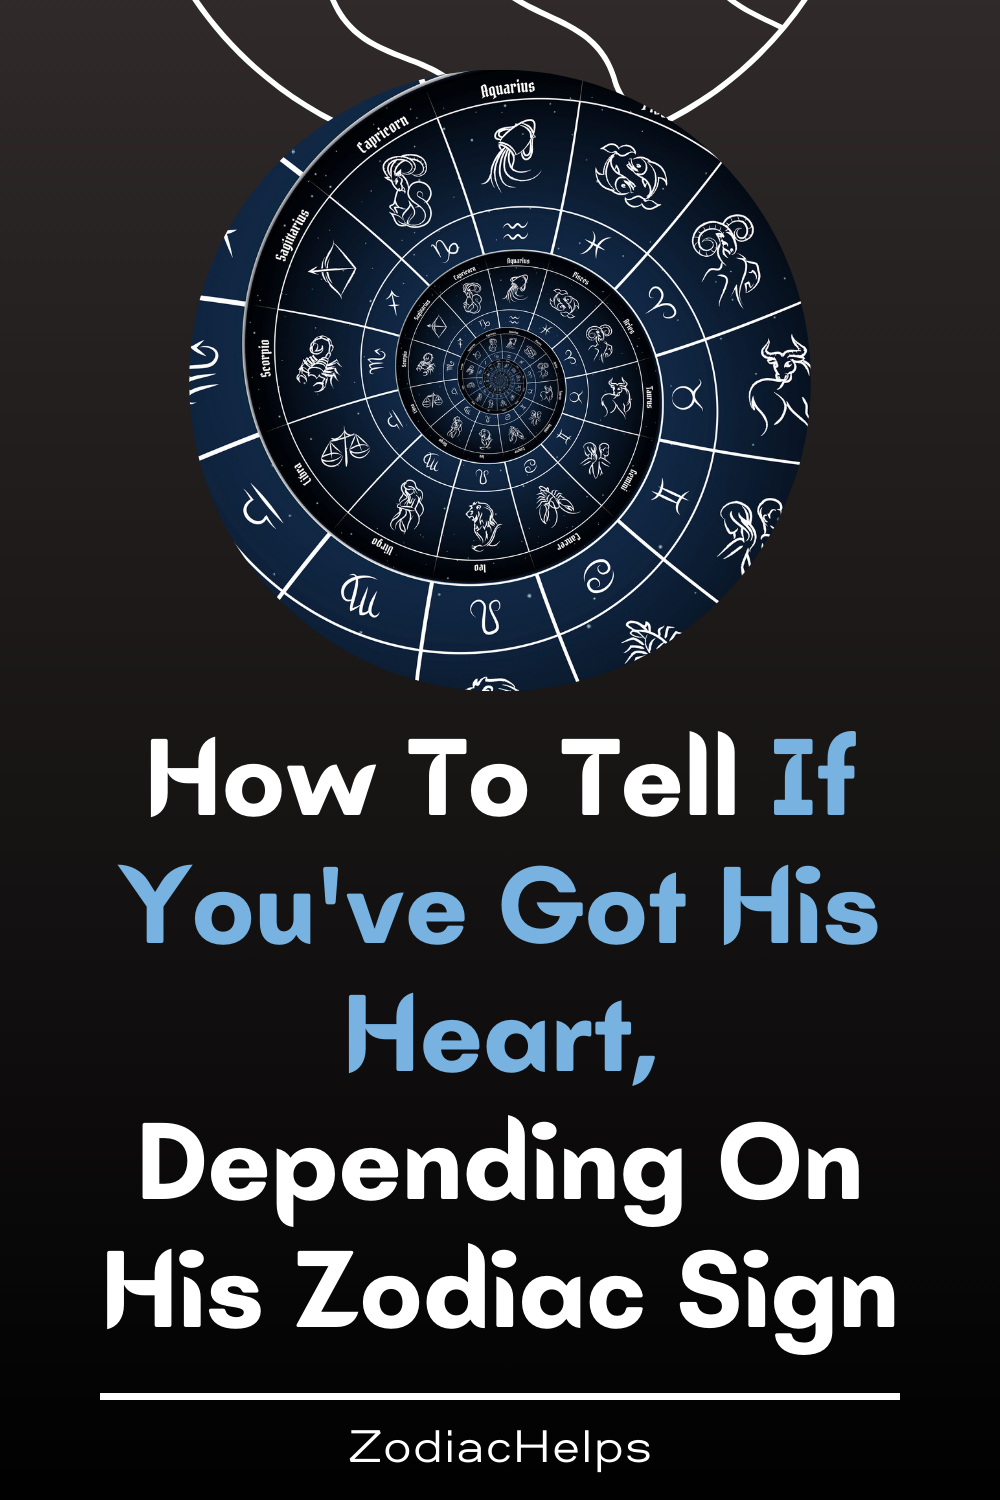 How To Tell If You've Got His Heart, Depending On His Zodiac Sign